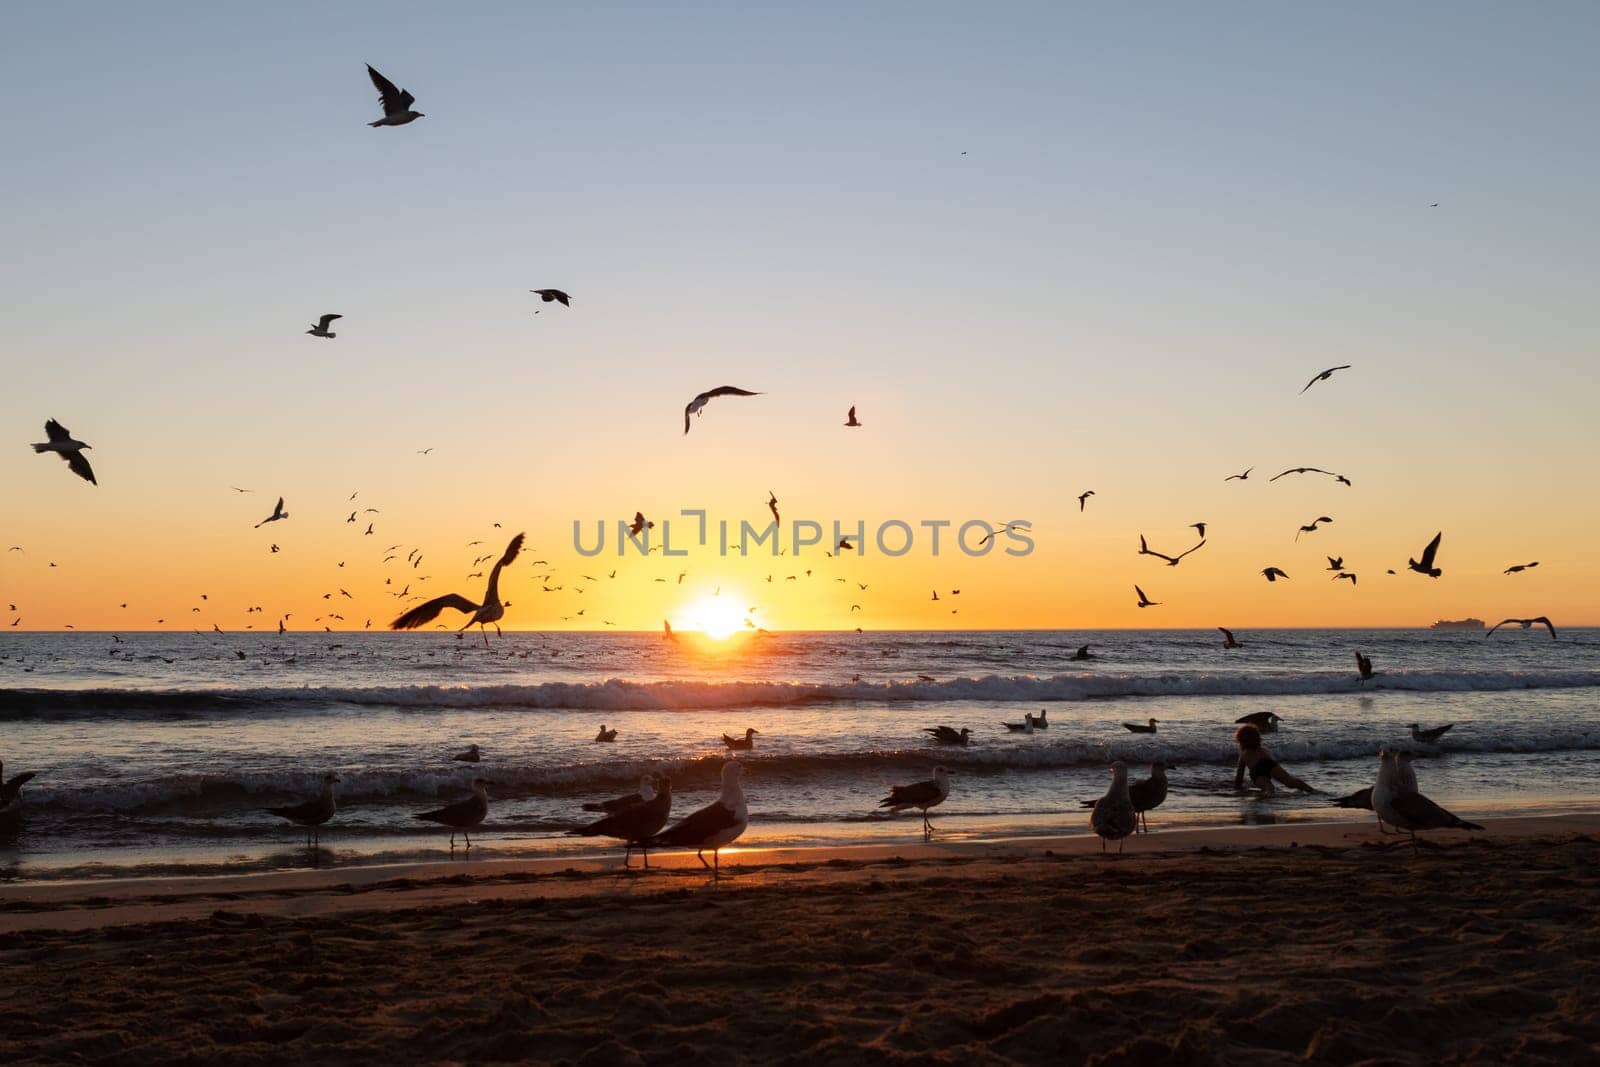 Seagulls flying all over the sea at sunset. Mid shot